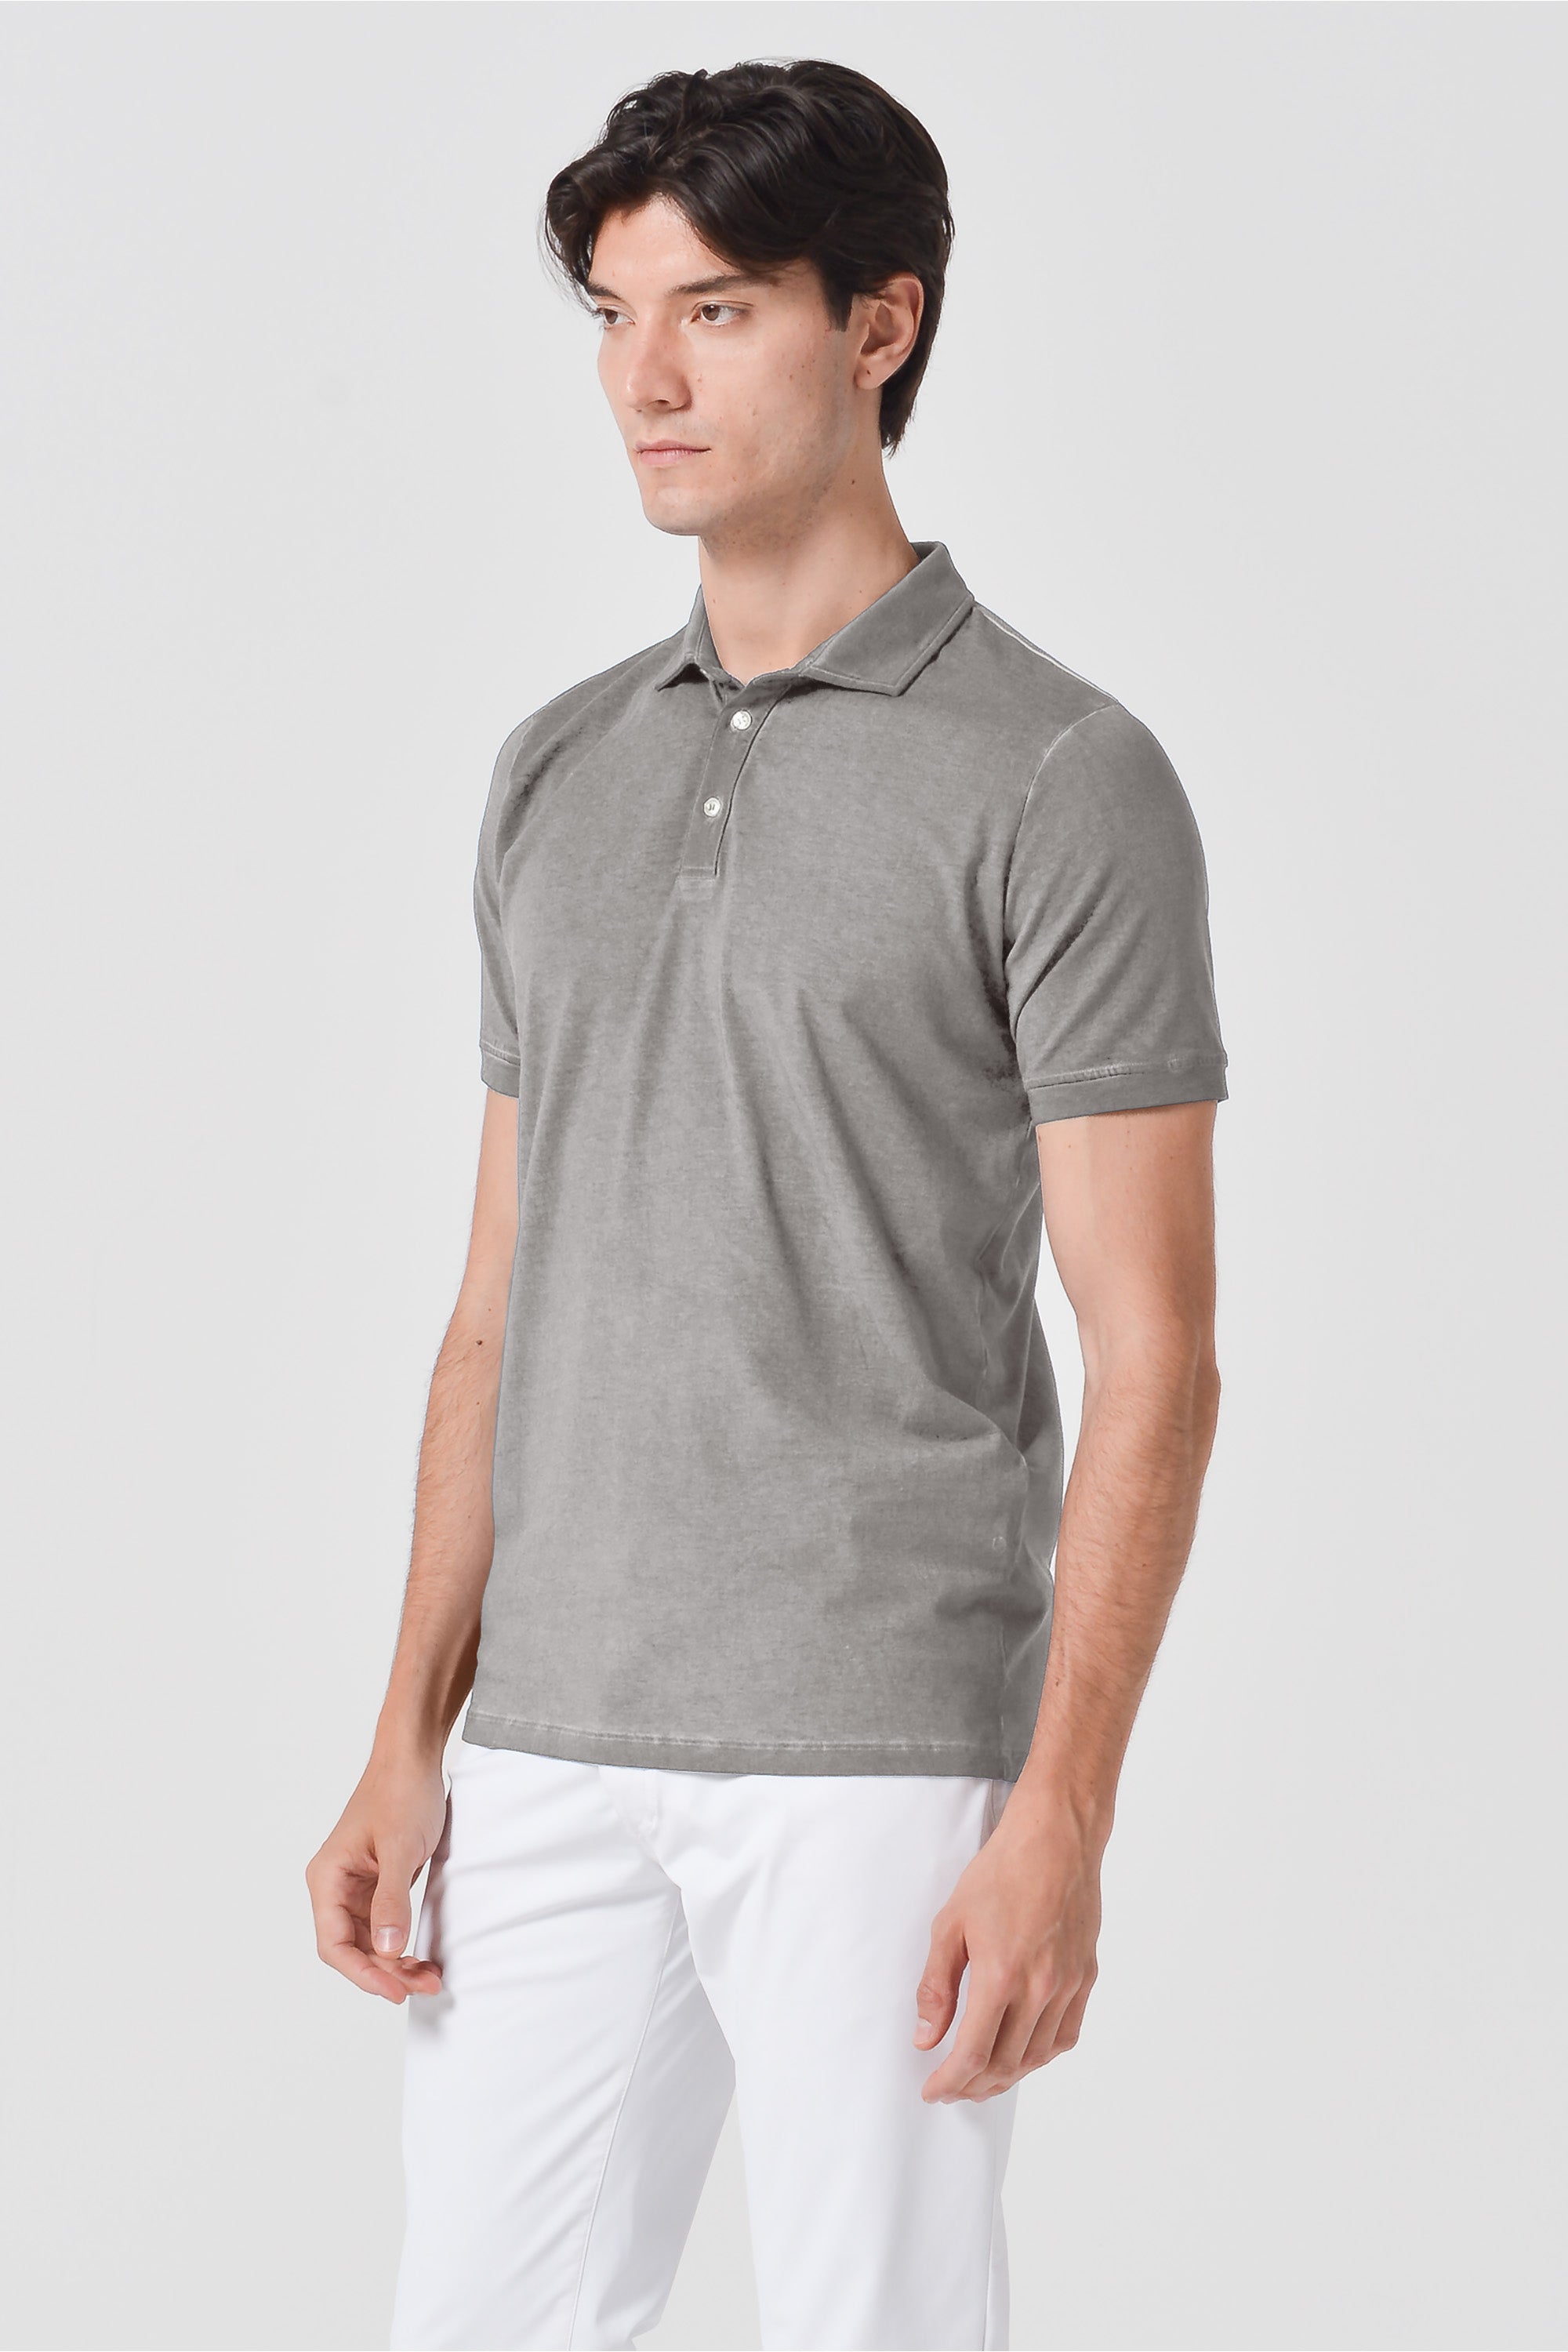 Performance Polo in Steel